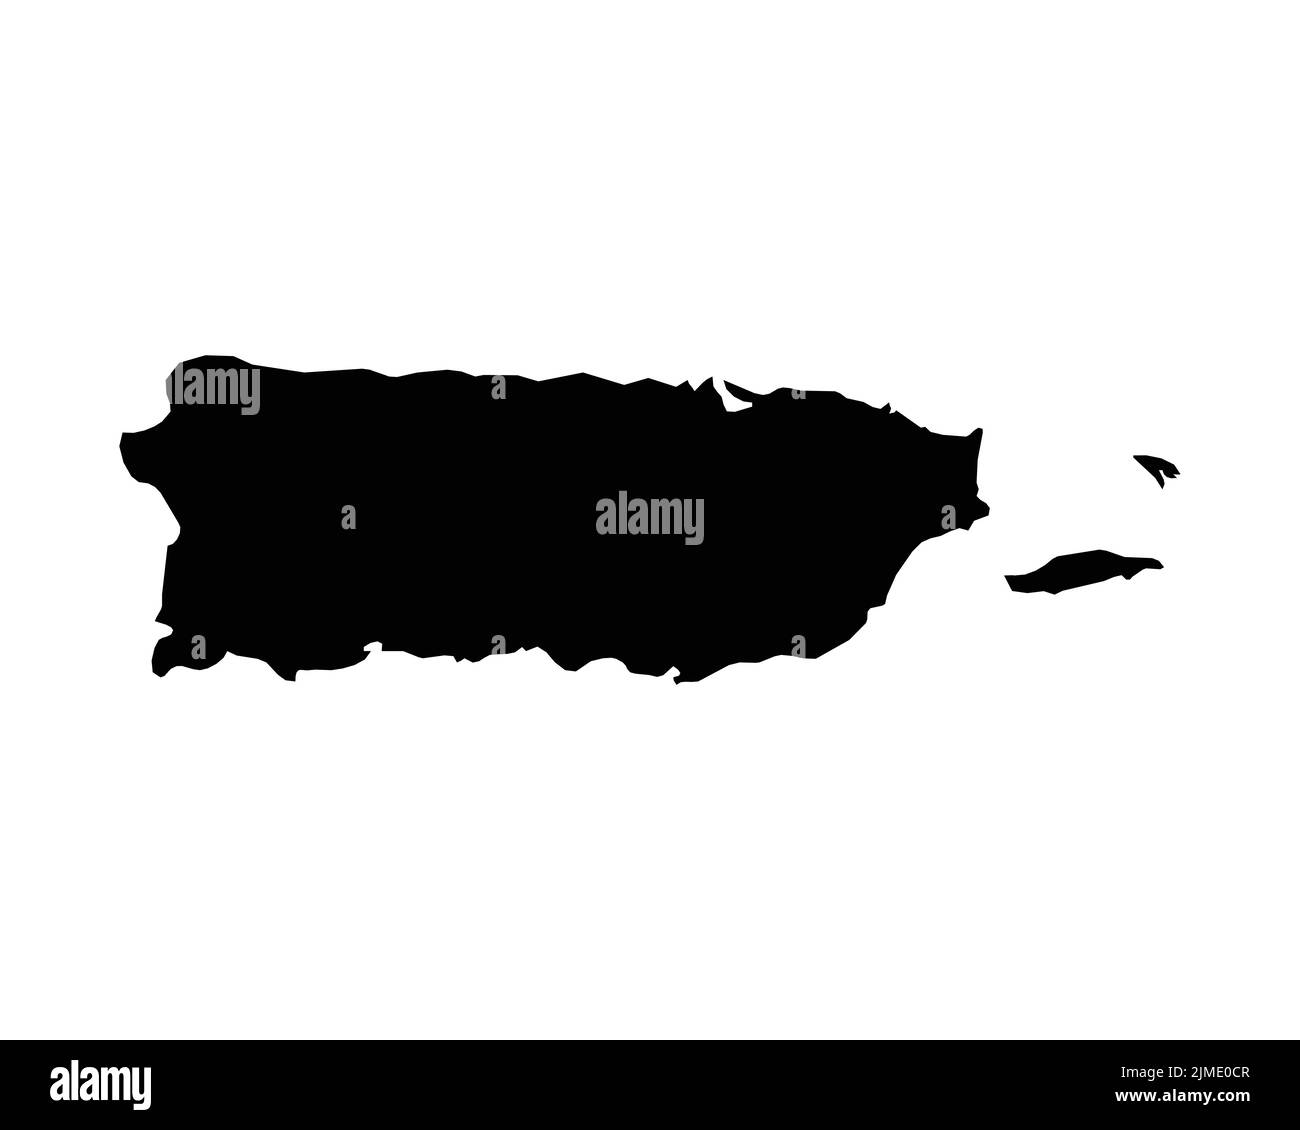 Puerto Rico Map. Puerto Rican Map. Black and White PR US USA Territory Border Boundary Line Outline Geography Shape Vector Illustration EPS Clipart Stock Vector